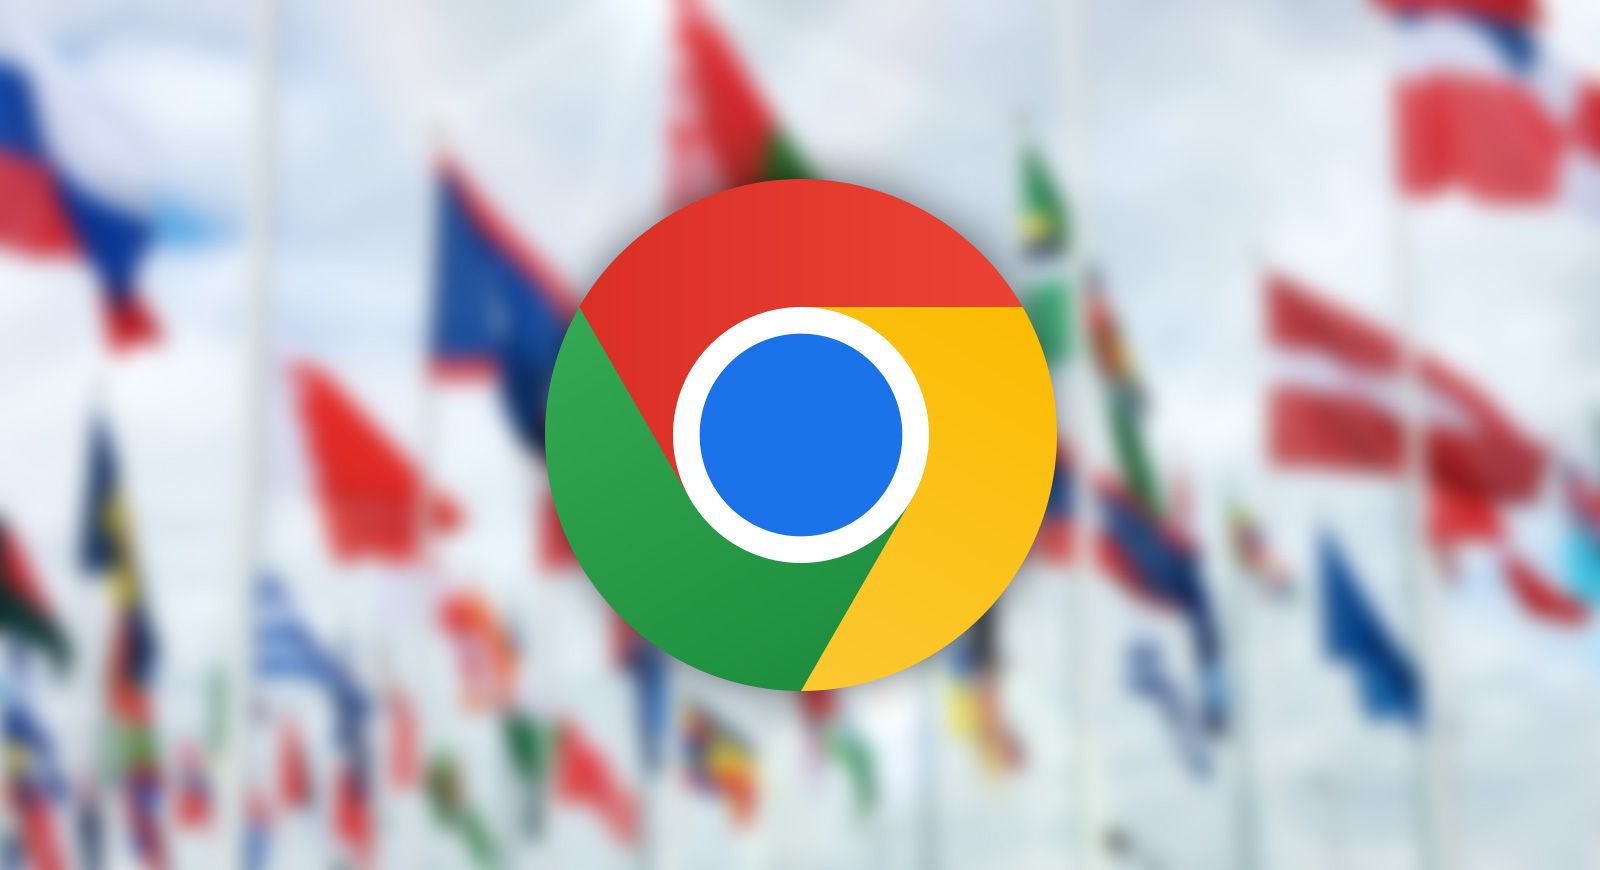 The Google Chrome logo with international flags in the background.